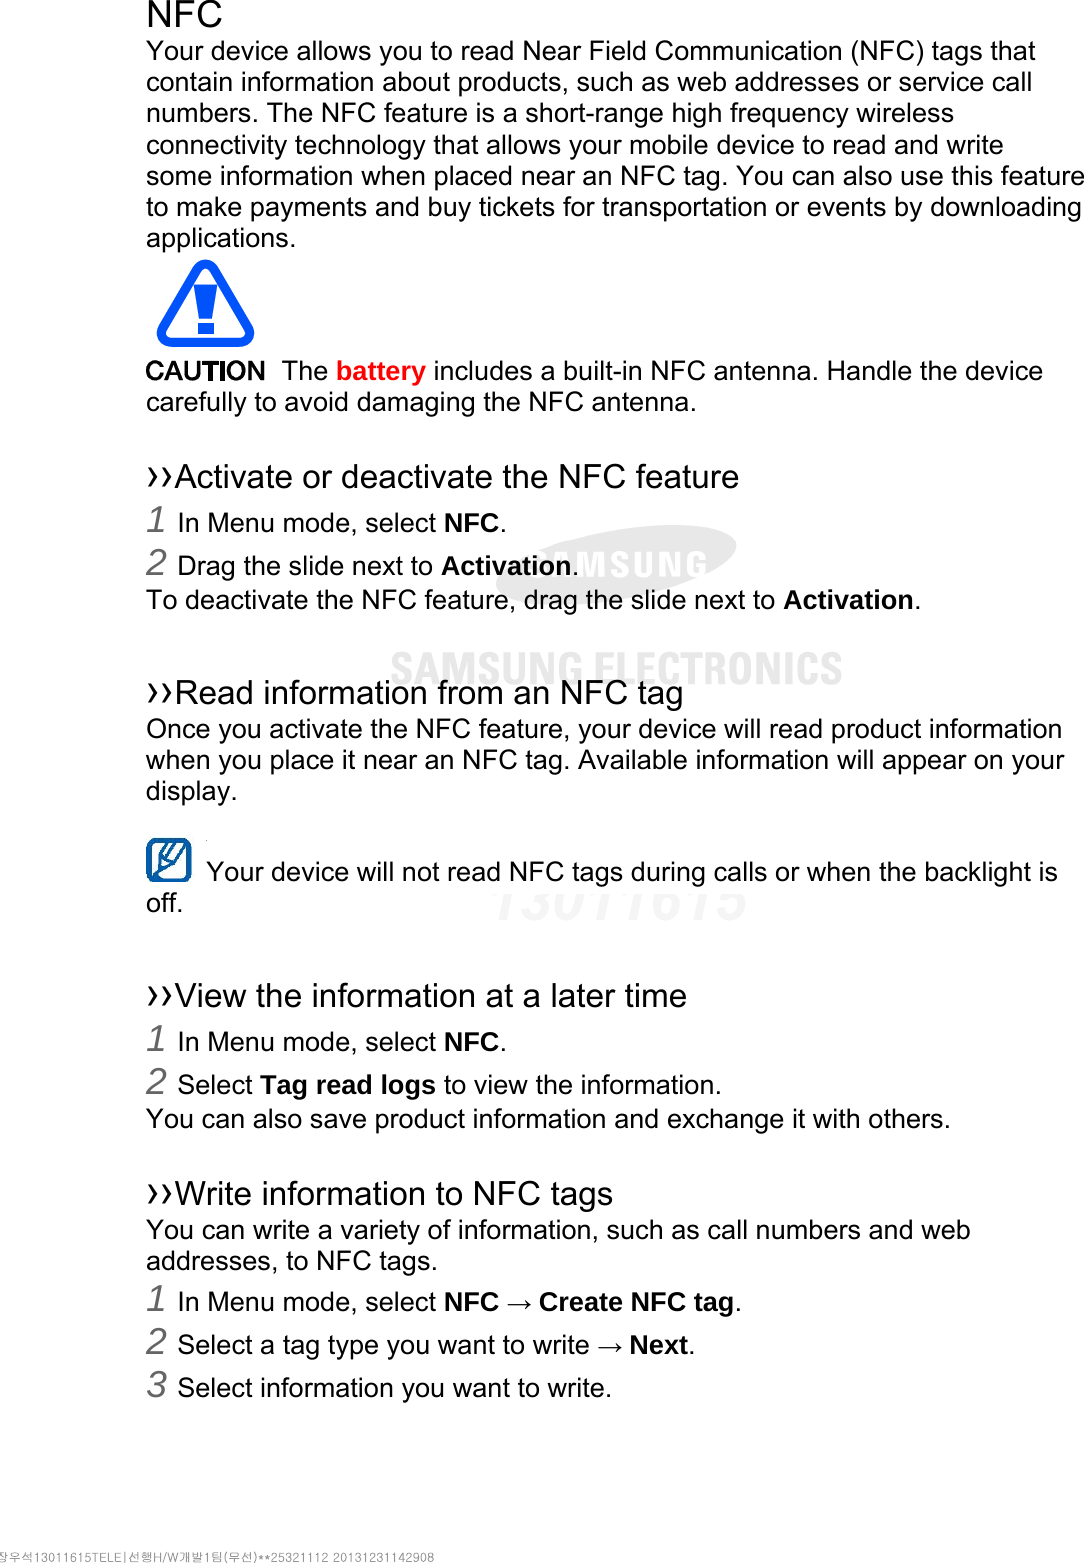 NFC Your device allows you to read Near Field Communication (NFC) tags that contain information about products, such as web addresses or service call numbers. The NFC feature is a short-range high frequency wireless connectivity technology that allows your mobile device to read and write some information when placed near an NFC tag. You can also use this feature to make payments and buy tickets for transportation or events by downloading applications.   The battery includes a built-in NFC antenna. Handle the device carefully to avoid damaging the NFC antenna.  ››Activate or deactivate the NFC feature 1 In Menu mode, select NFC. 2 Drag the slide next to Activation. To deactivate the NFC feature, drag the slide next to Activation.  ››Read information from an NFC tag Once you activate the NFC feature, your device will read product information when you place it near an NFC tag. Available information will appear on your display.  Your device will not read NFC tags during calls or when the backlight is   off.  ››View the information at a later time 1 In Menu mode, select NFC. 2 Select Tag read logs to view the information. You can also save product information and exchange it with others.  ››Write information to NFC tags   You can write a variety of information, such as call numbers and web addresses, to NFC tags. 1 In Menu mode, select NFC → Create NFC tag. 2 Select a tag type you want to write → Next. 3 Select information you want to write. 